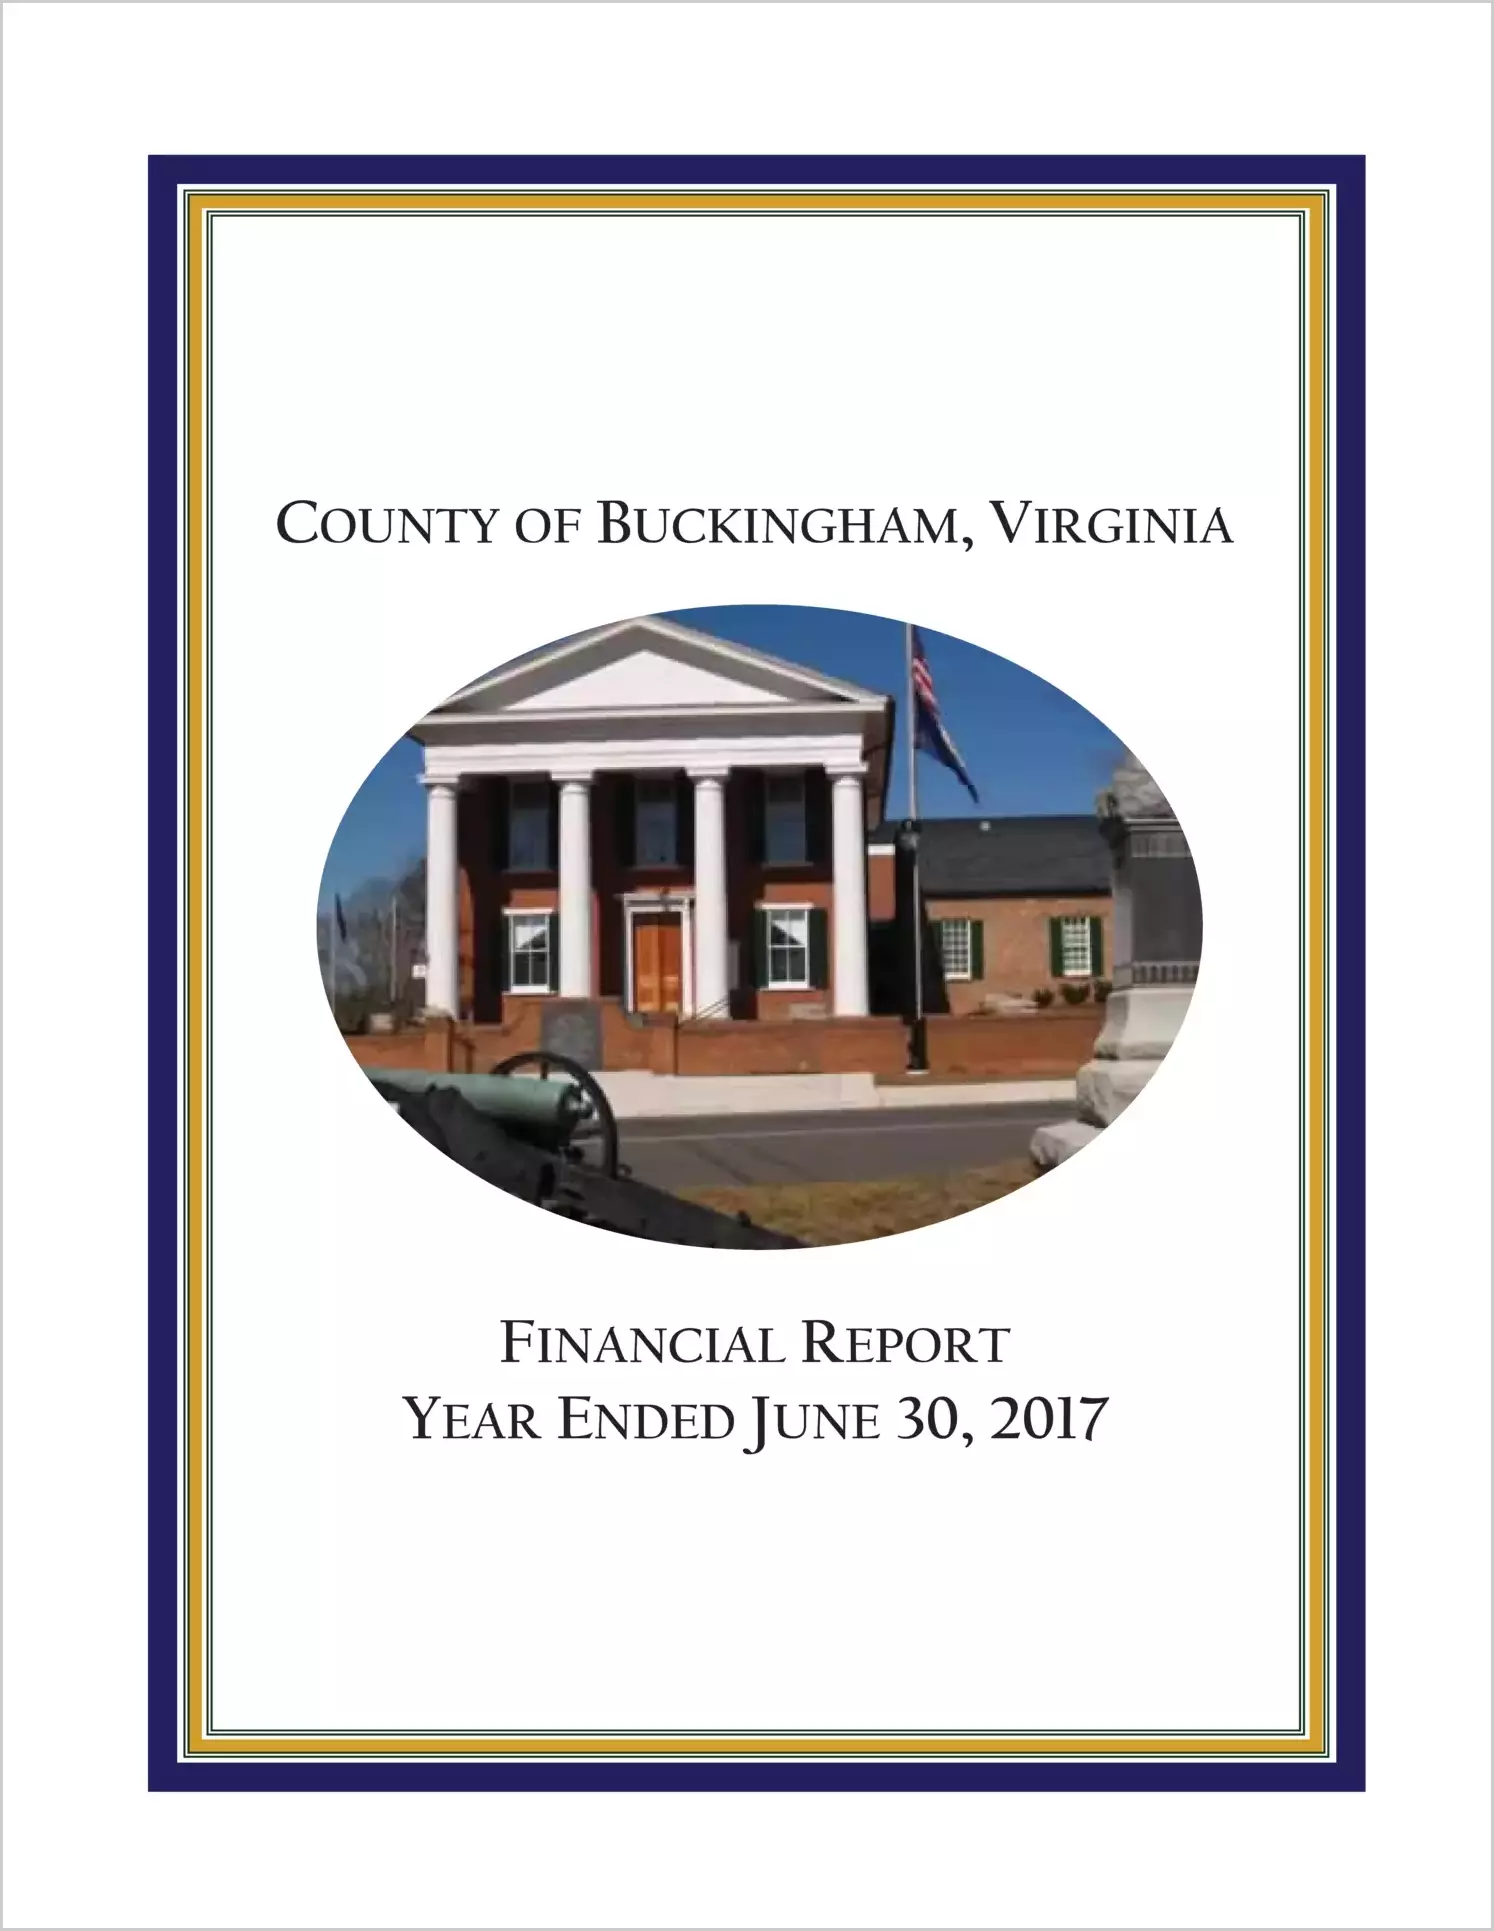 2017 Annual Financial Report for County of Buckingham